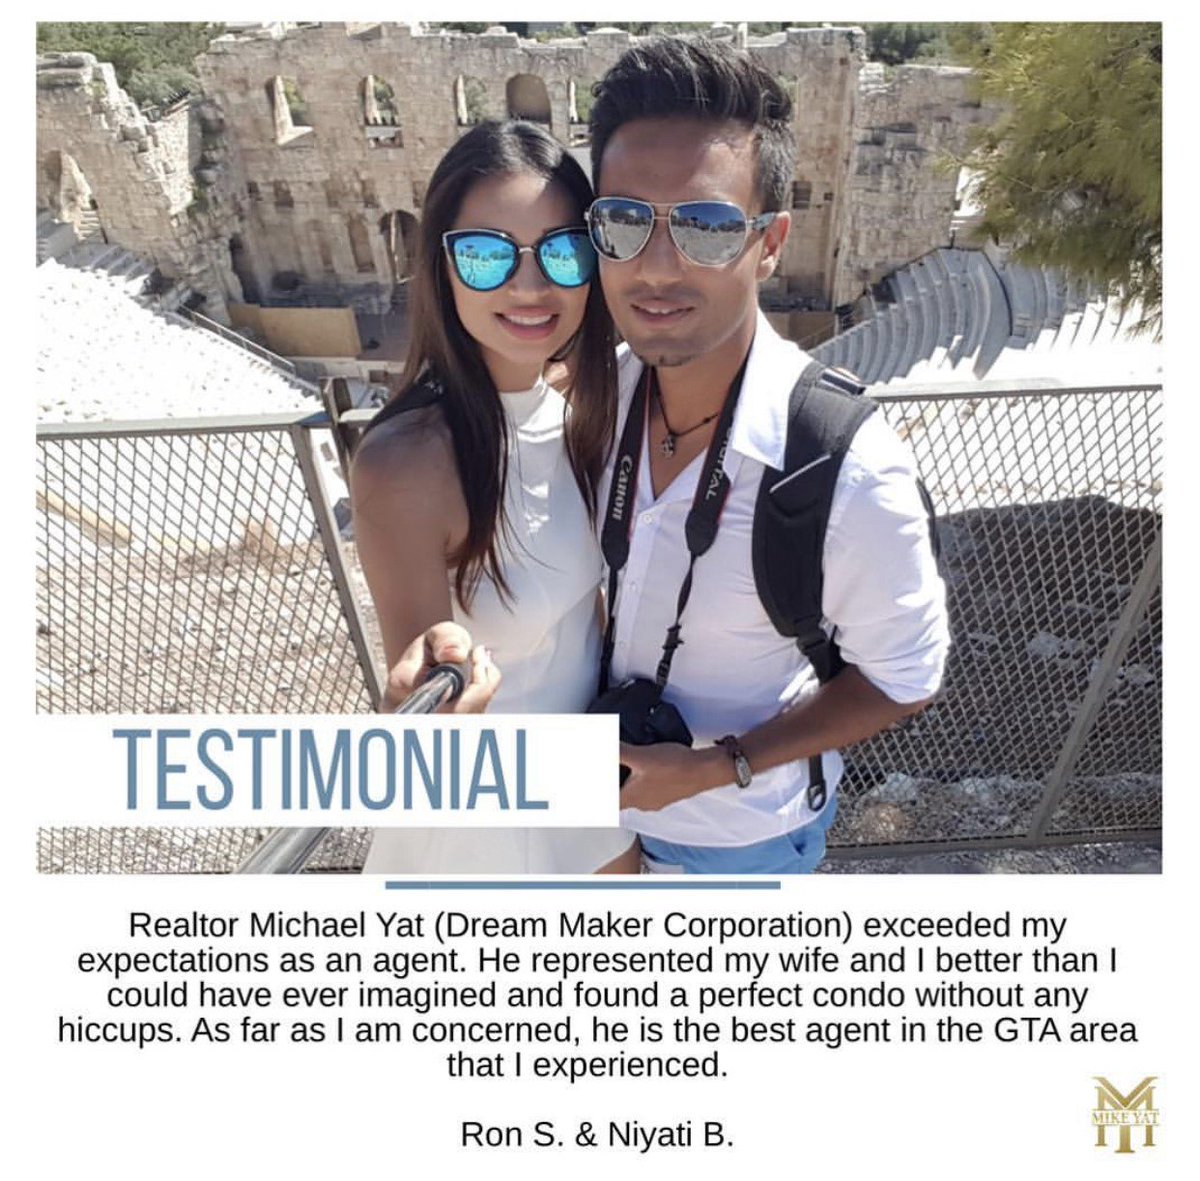 Testimonial for Mike from Ron and Niyati